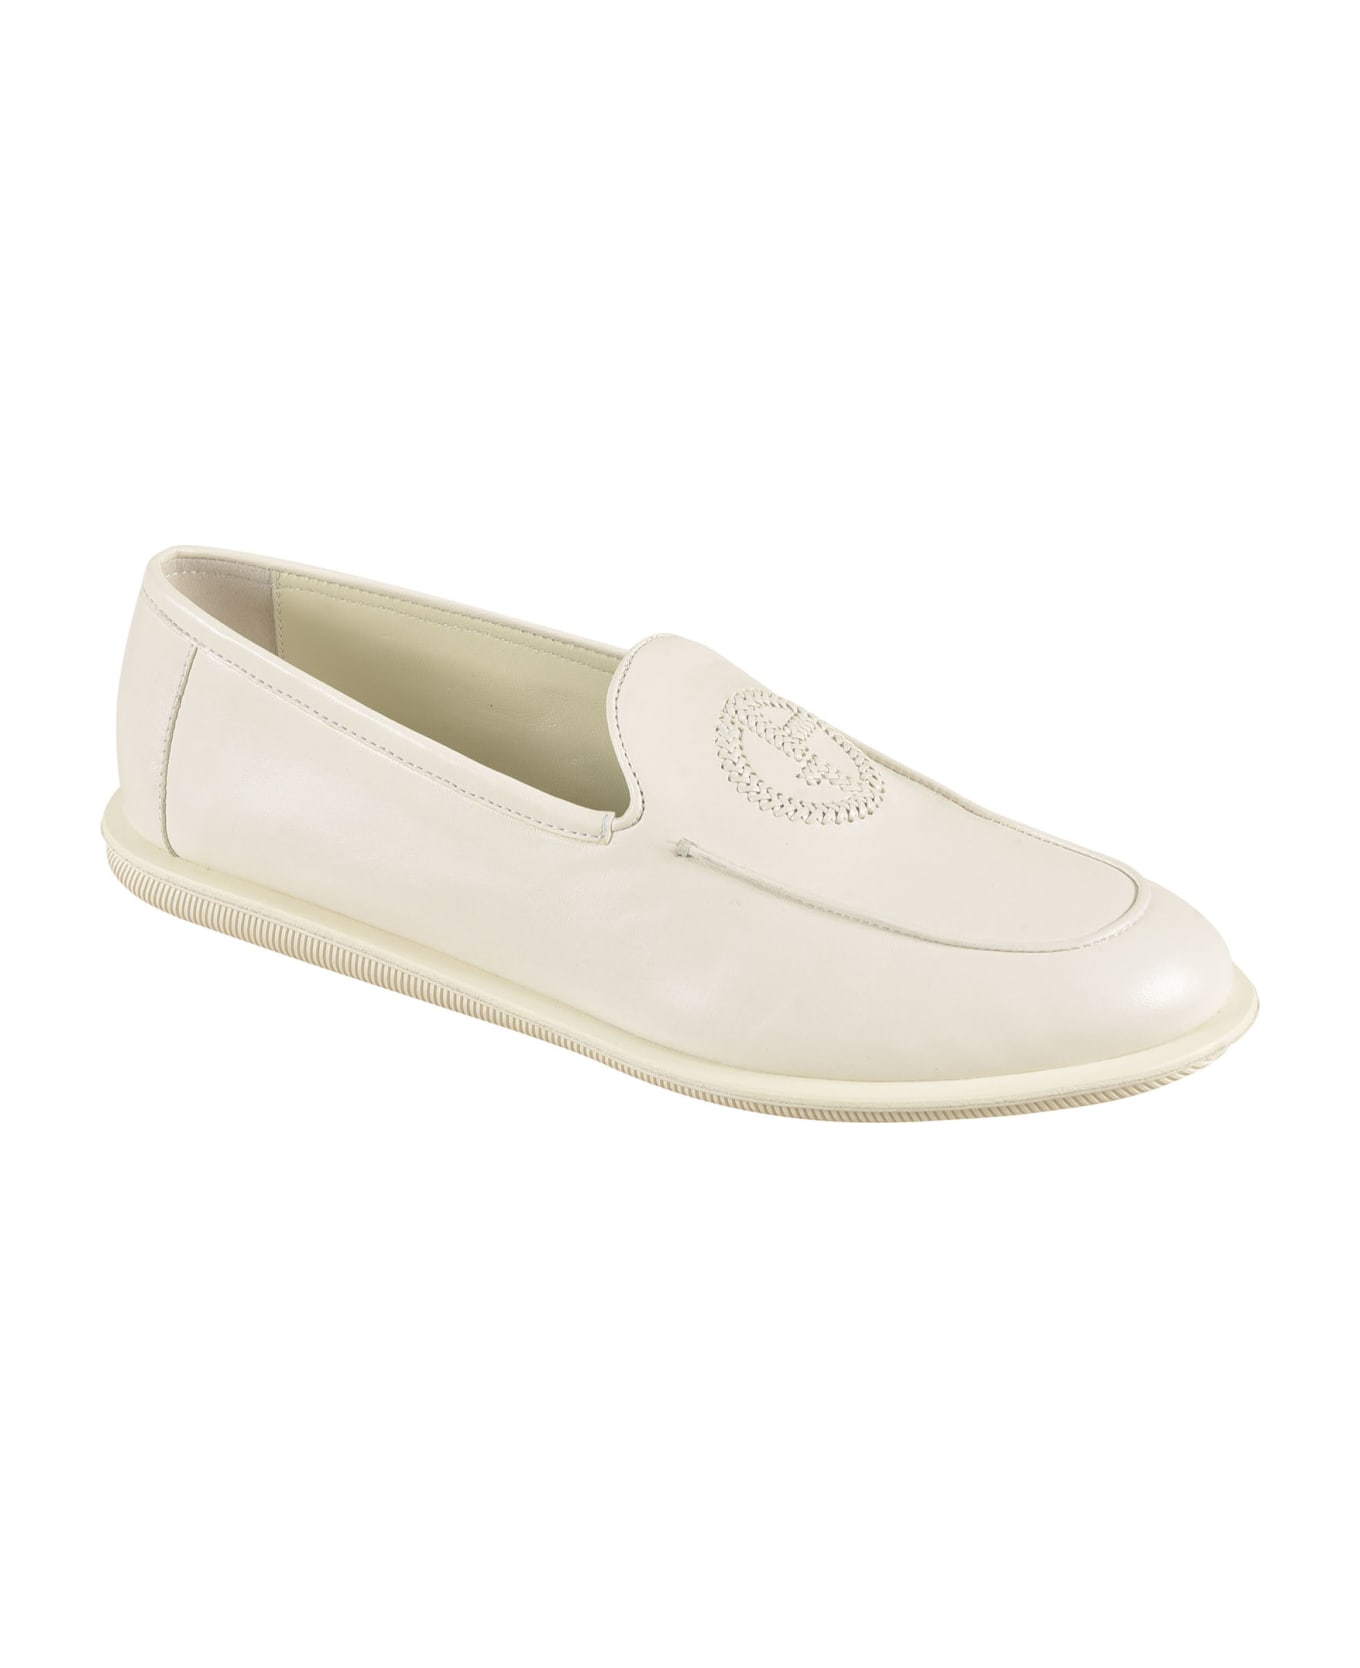 Giorgio Armani Classic Fitted Slide-on Loafers - 00638